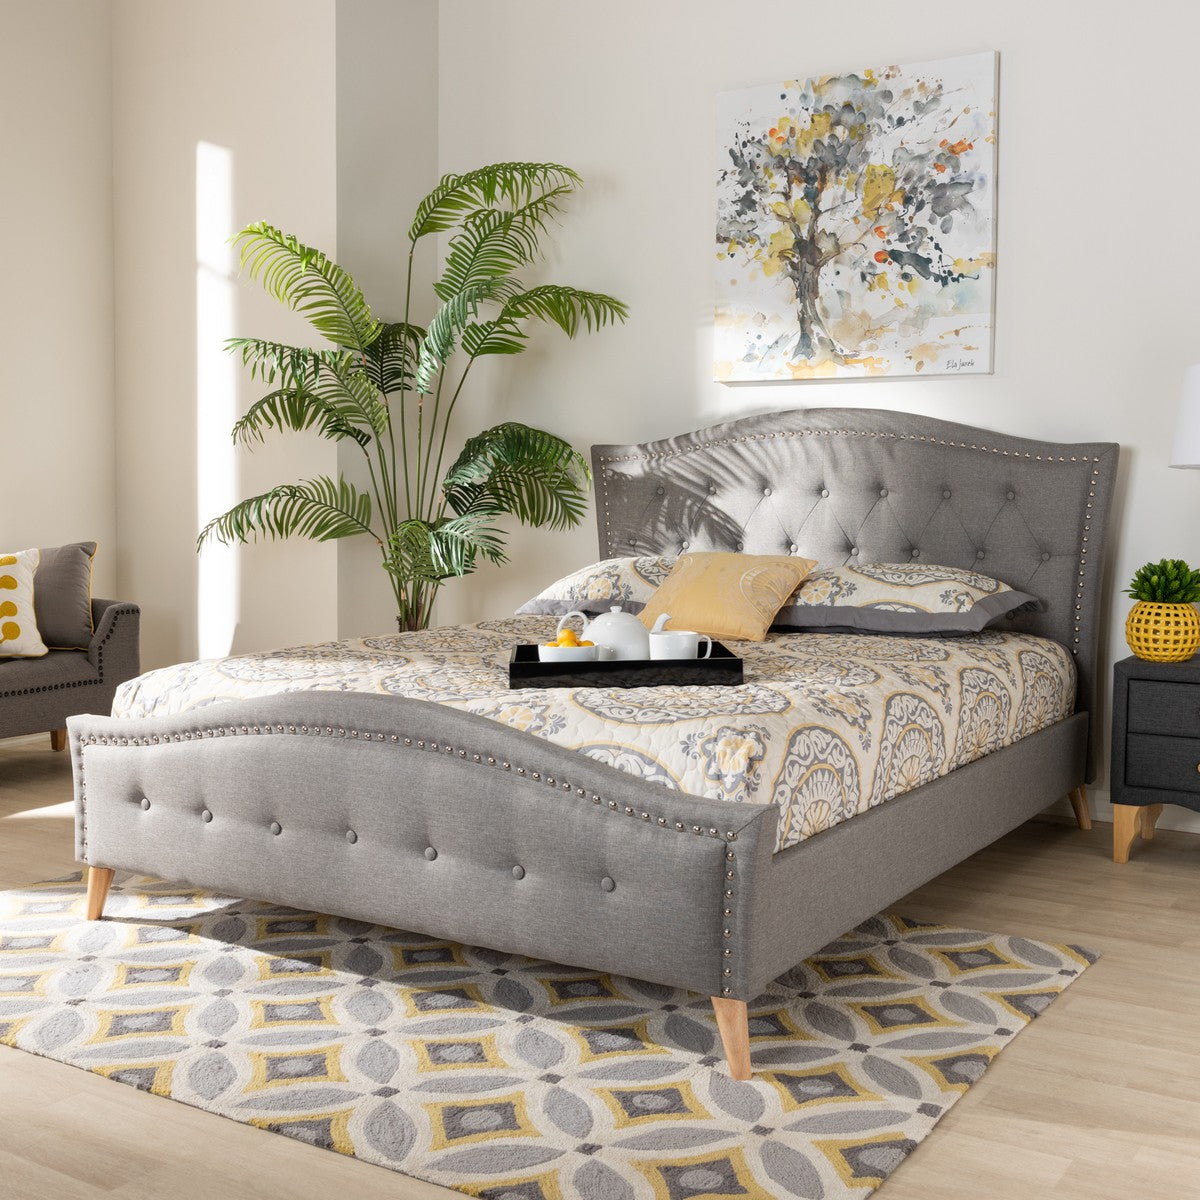 Baxton Studio Felisa Modern and Contemporary Grey Fabric Upholstered and Button Tufted King Size Platform Bed